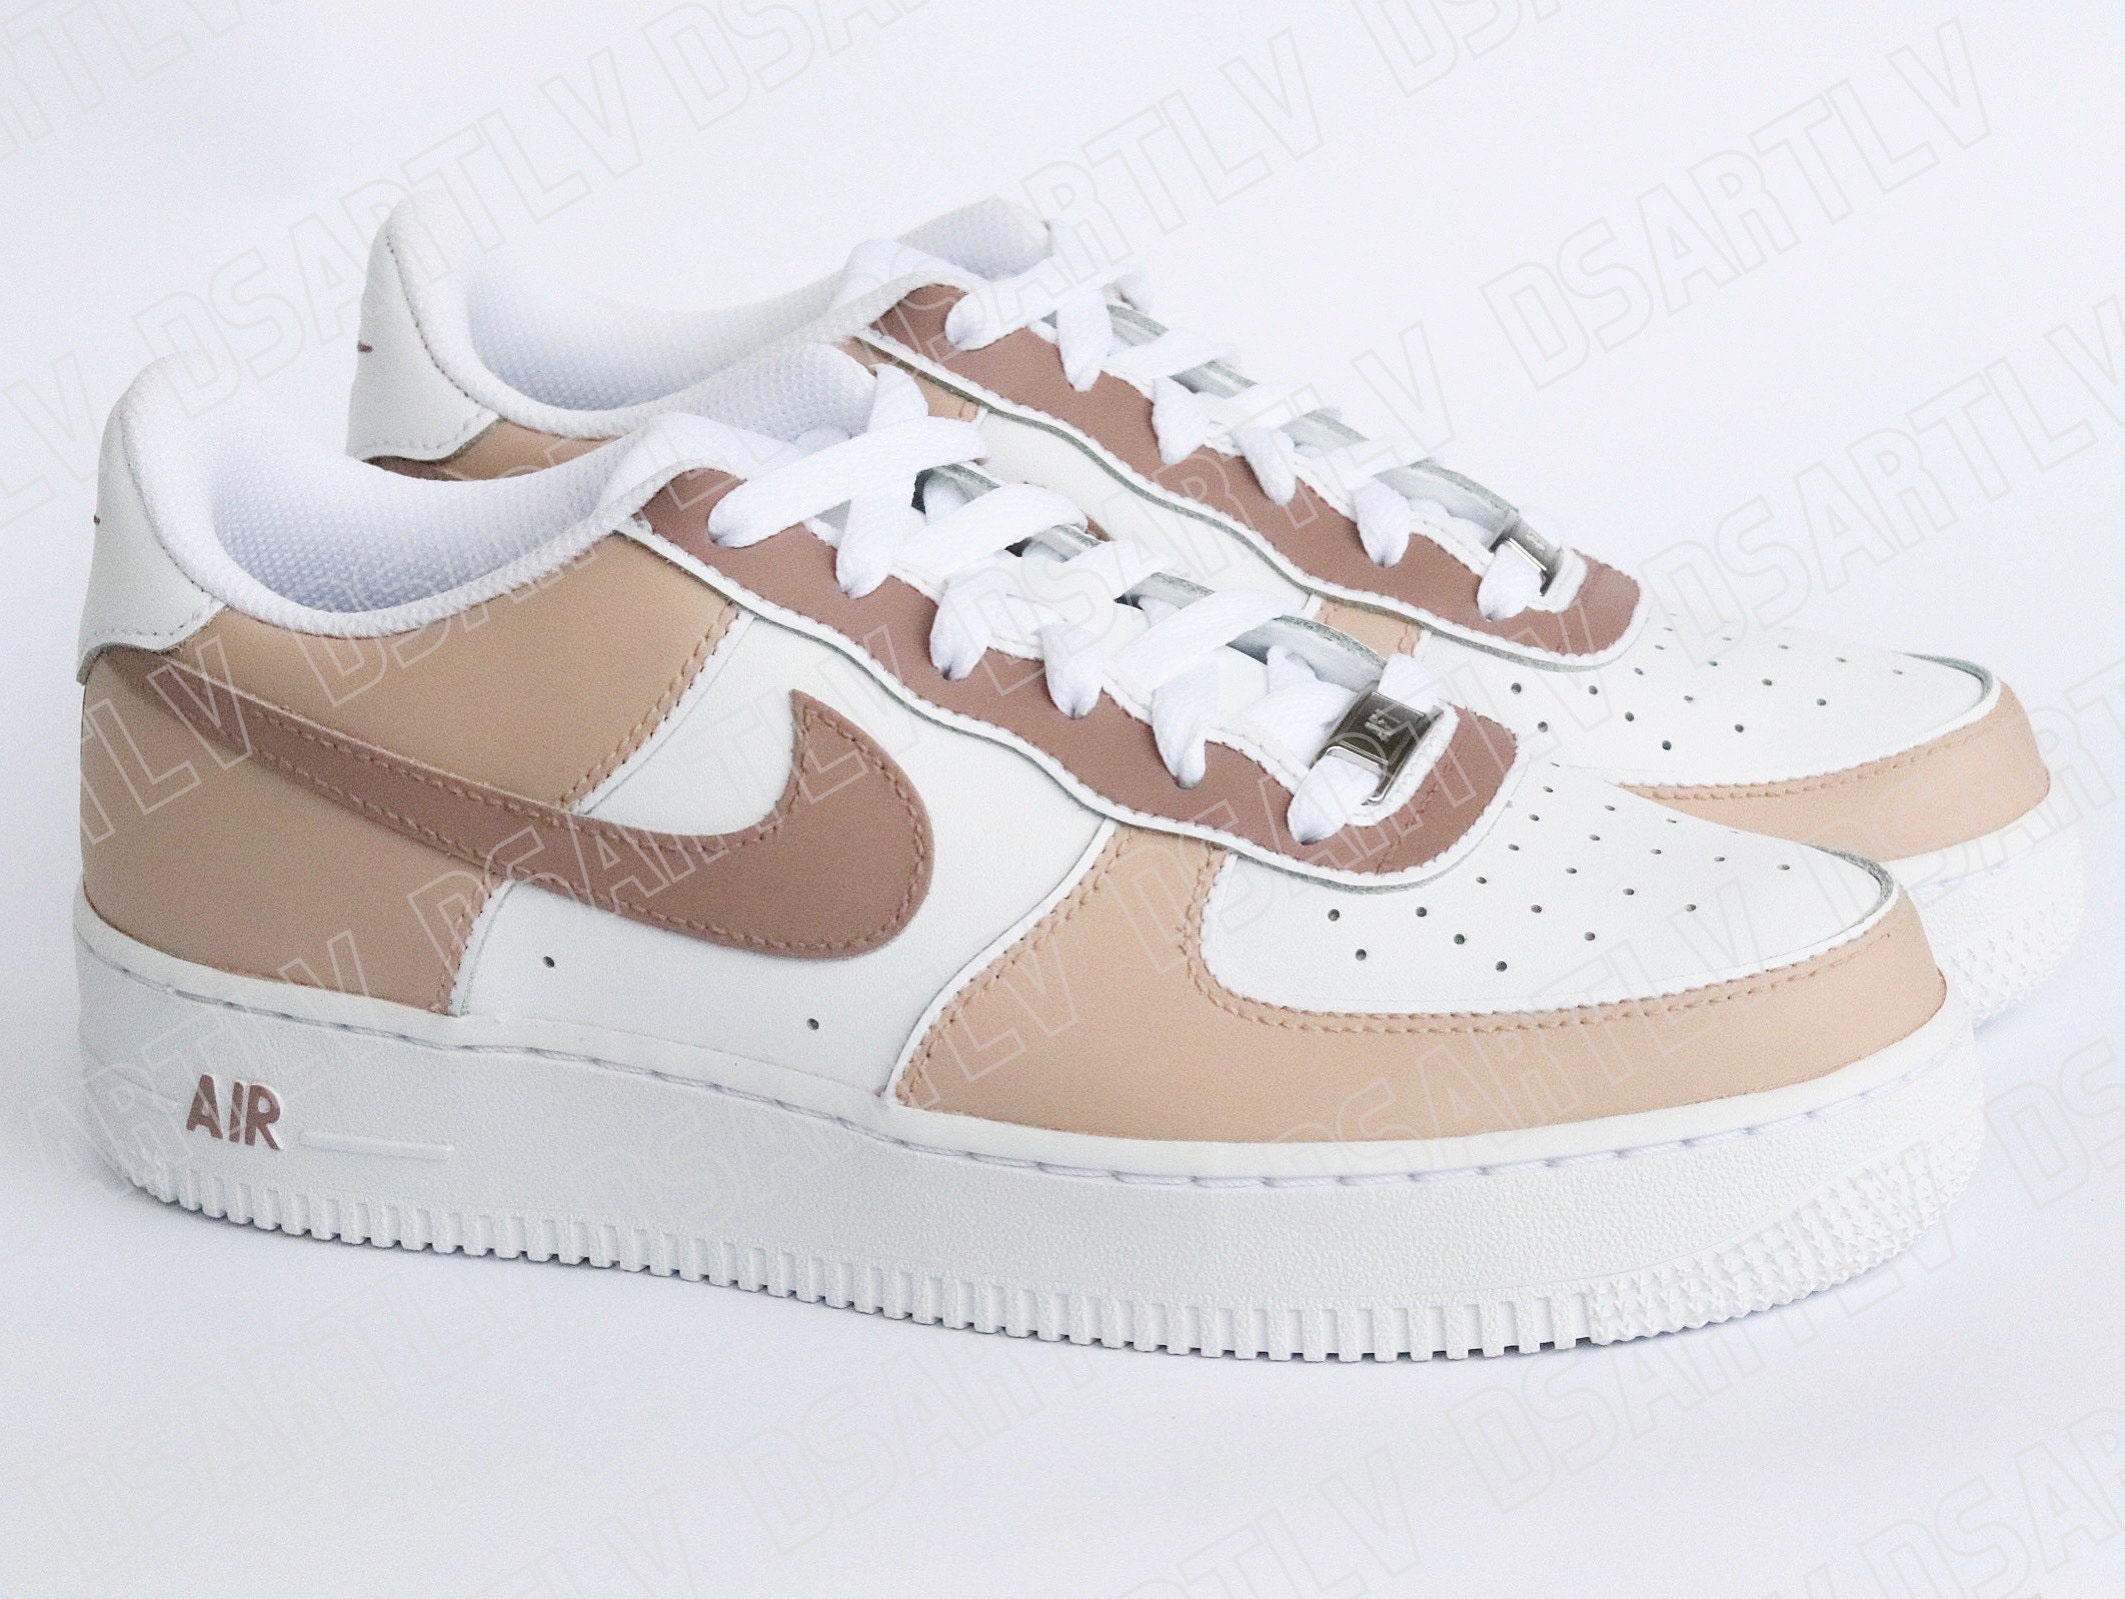 1. "Nike Air Force 1 Low Custom Sneakers with Nail Art" - wide 2